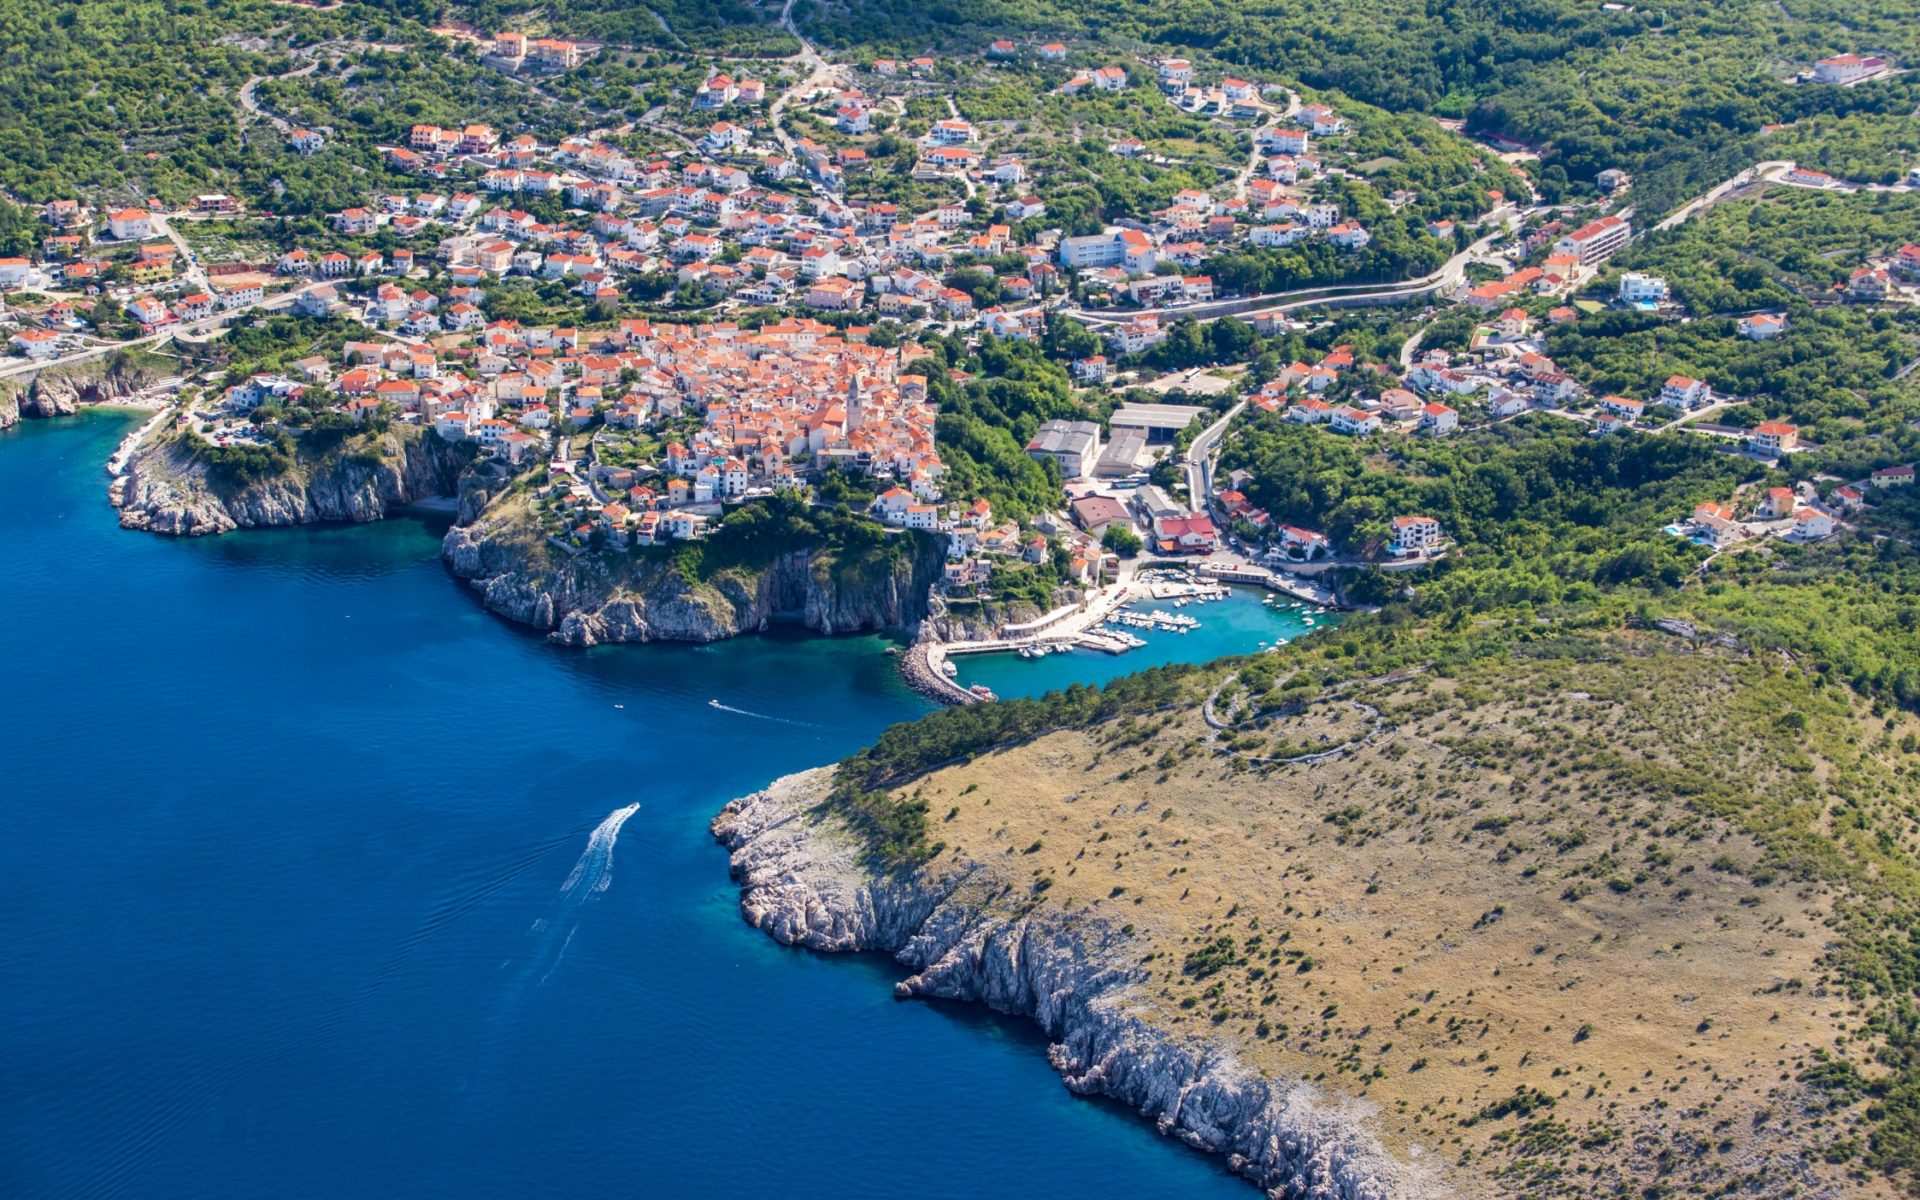 The town of Vrbnik (Krk)  with a secret underwater cave nearby (Image source: Vrbnik Tourist Board)